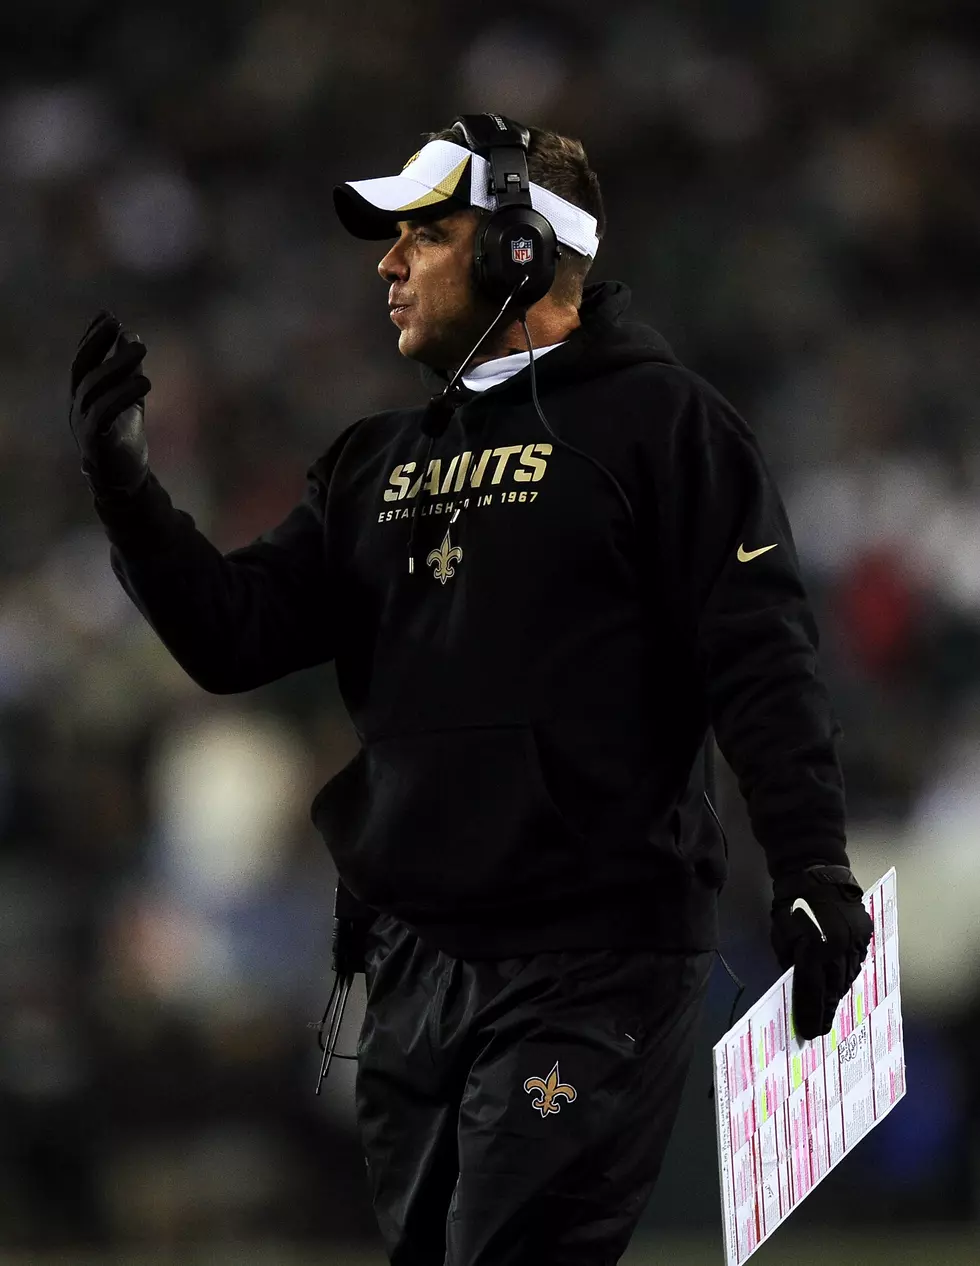 Saints Playoff Game Will Be Played in Freezing Conditions